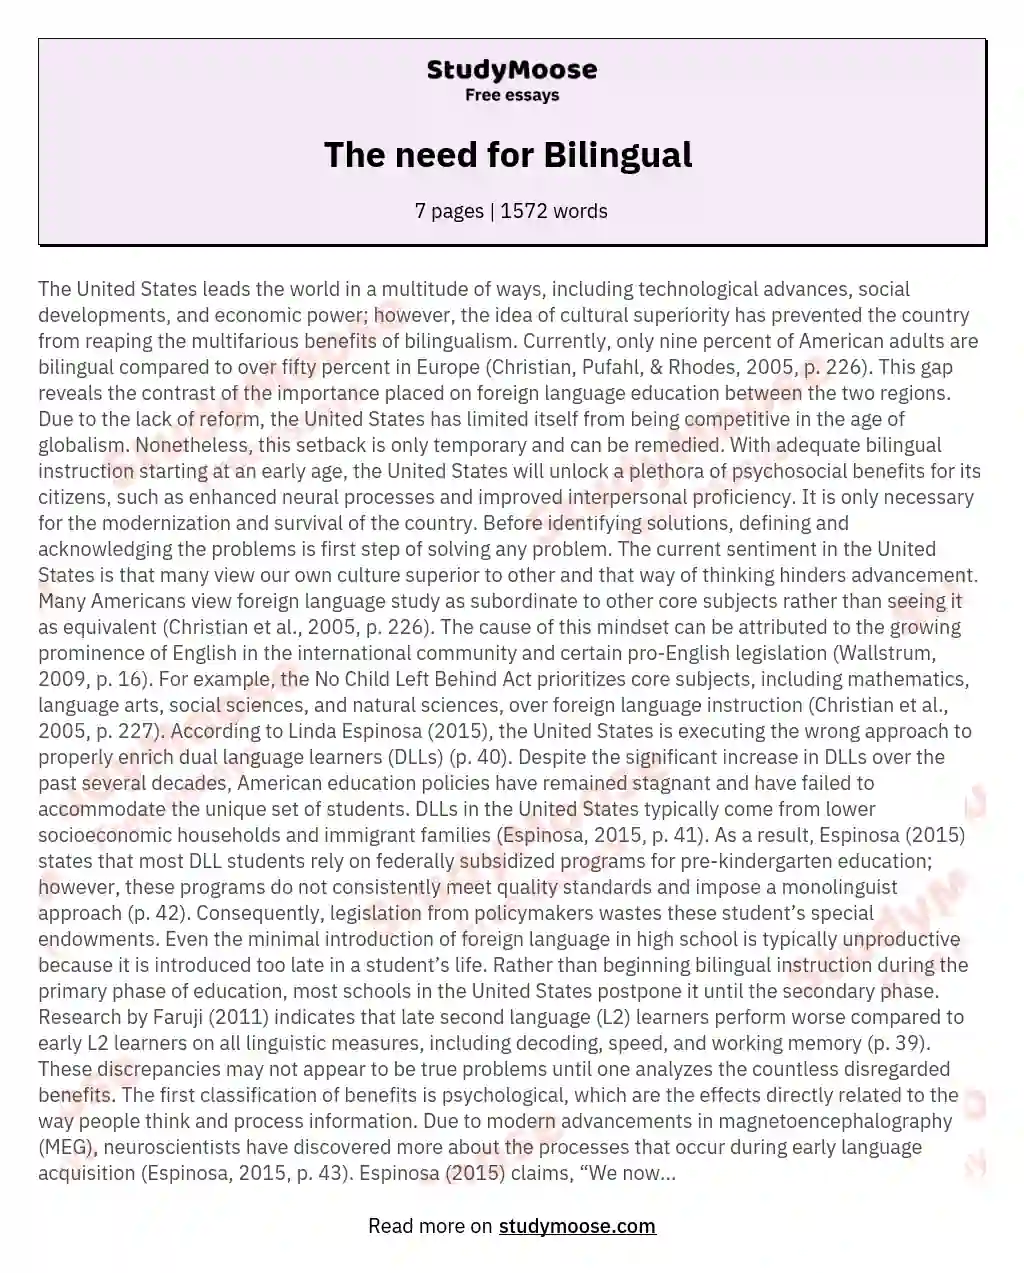 The need for Bilingual  essay